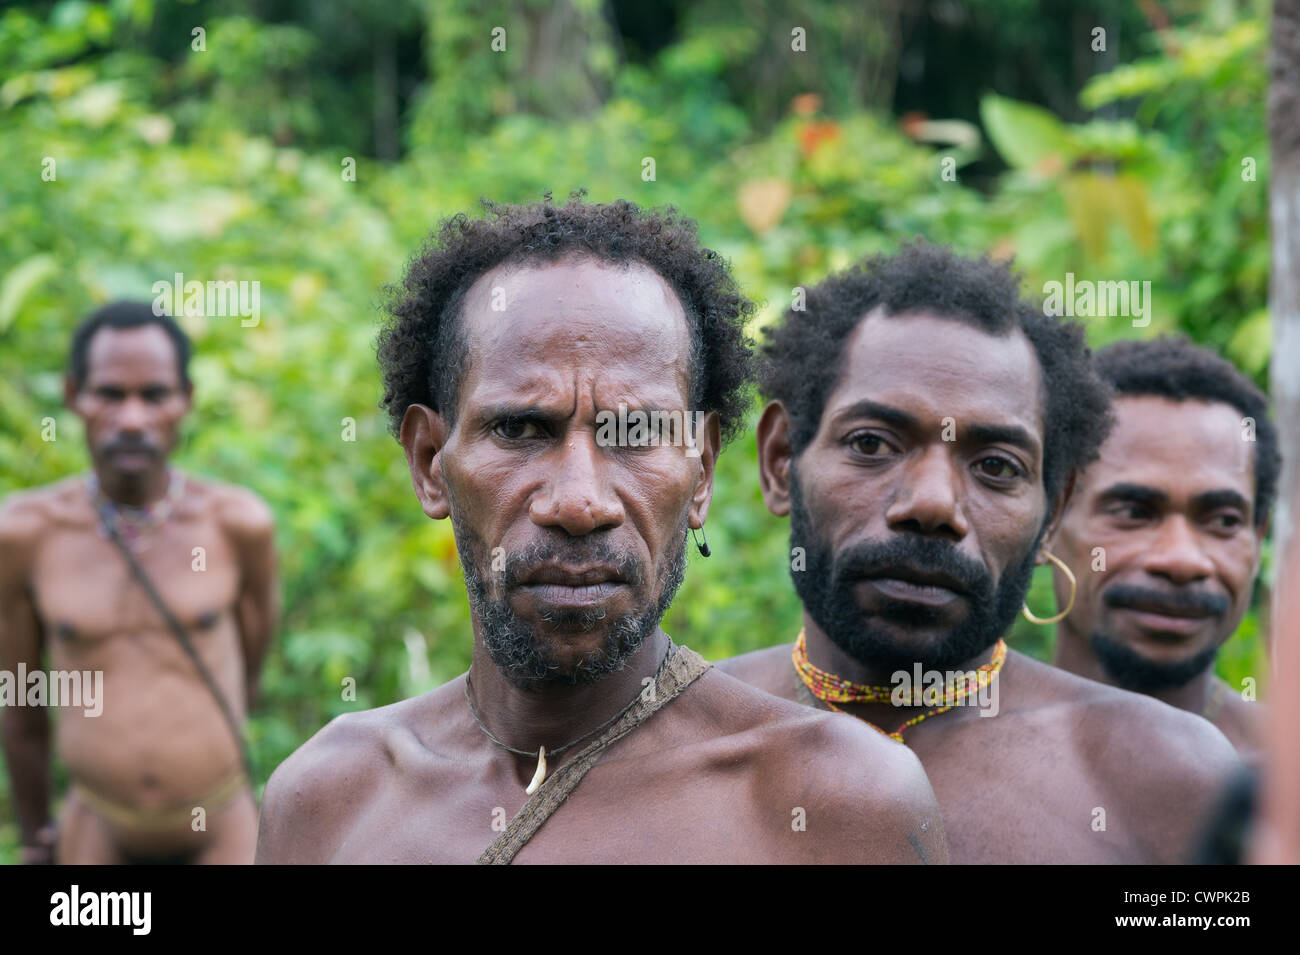 Group of Korowai people on the natural green forest background Stock Photo